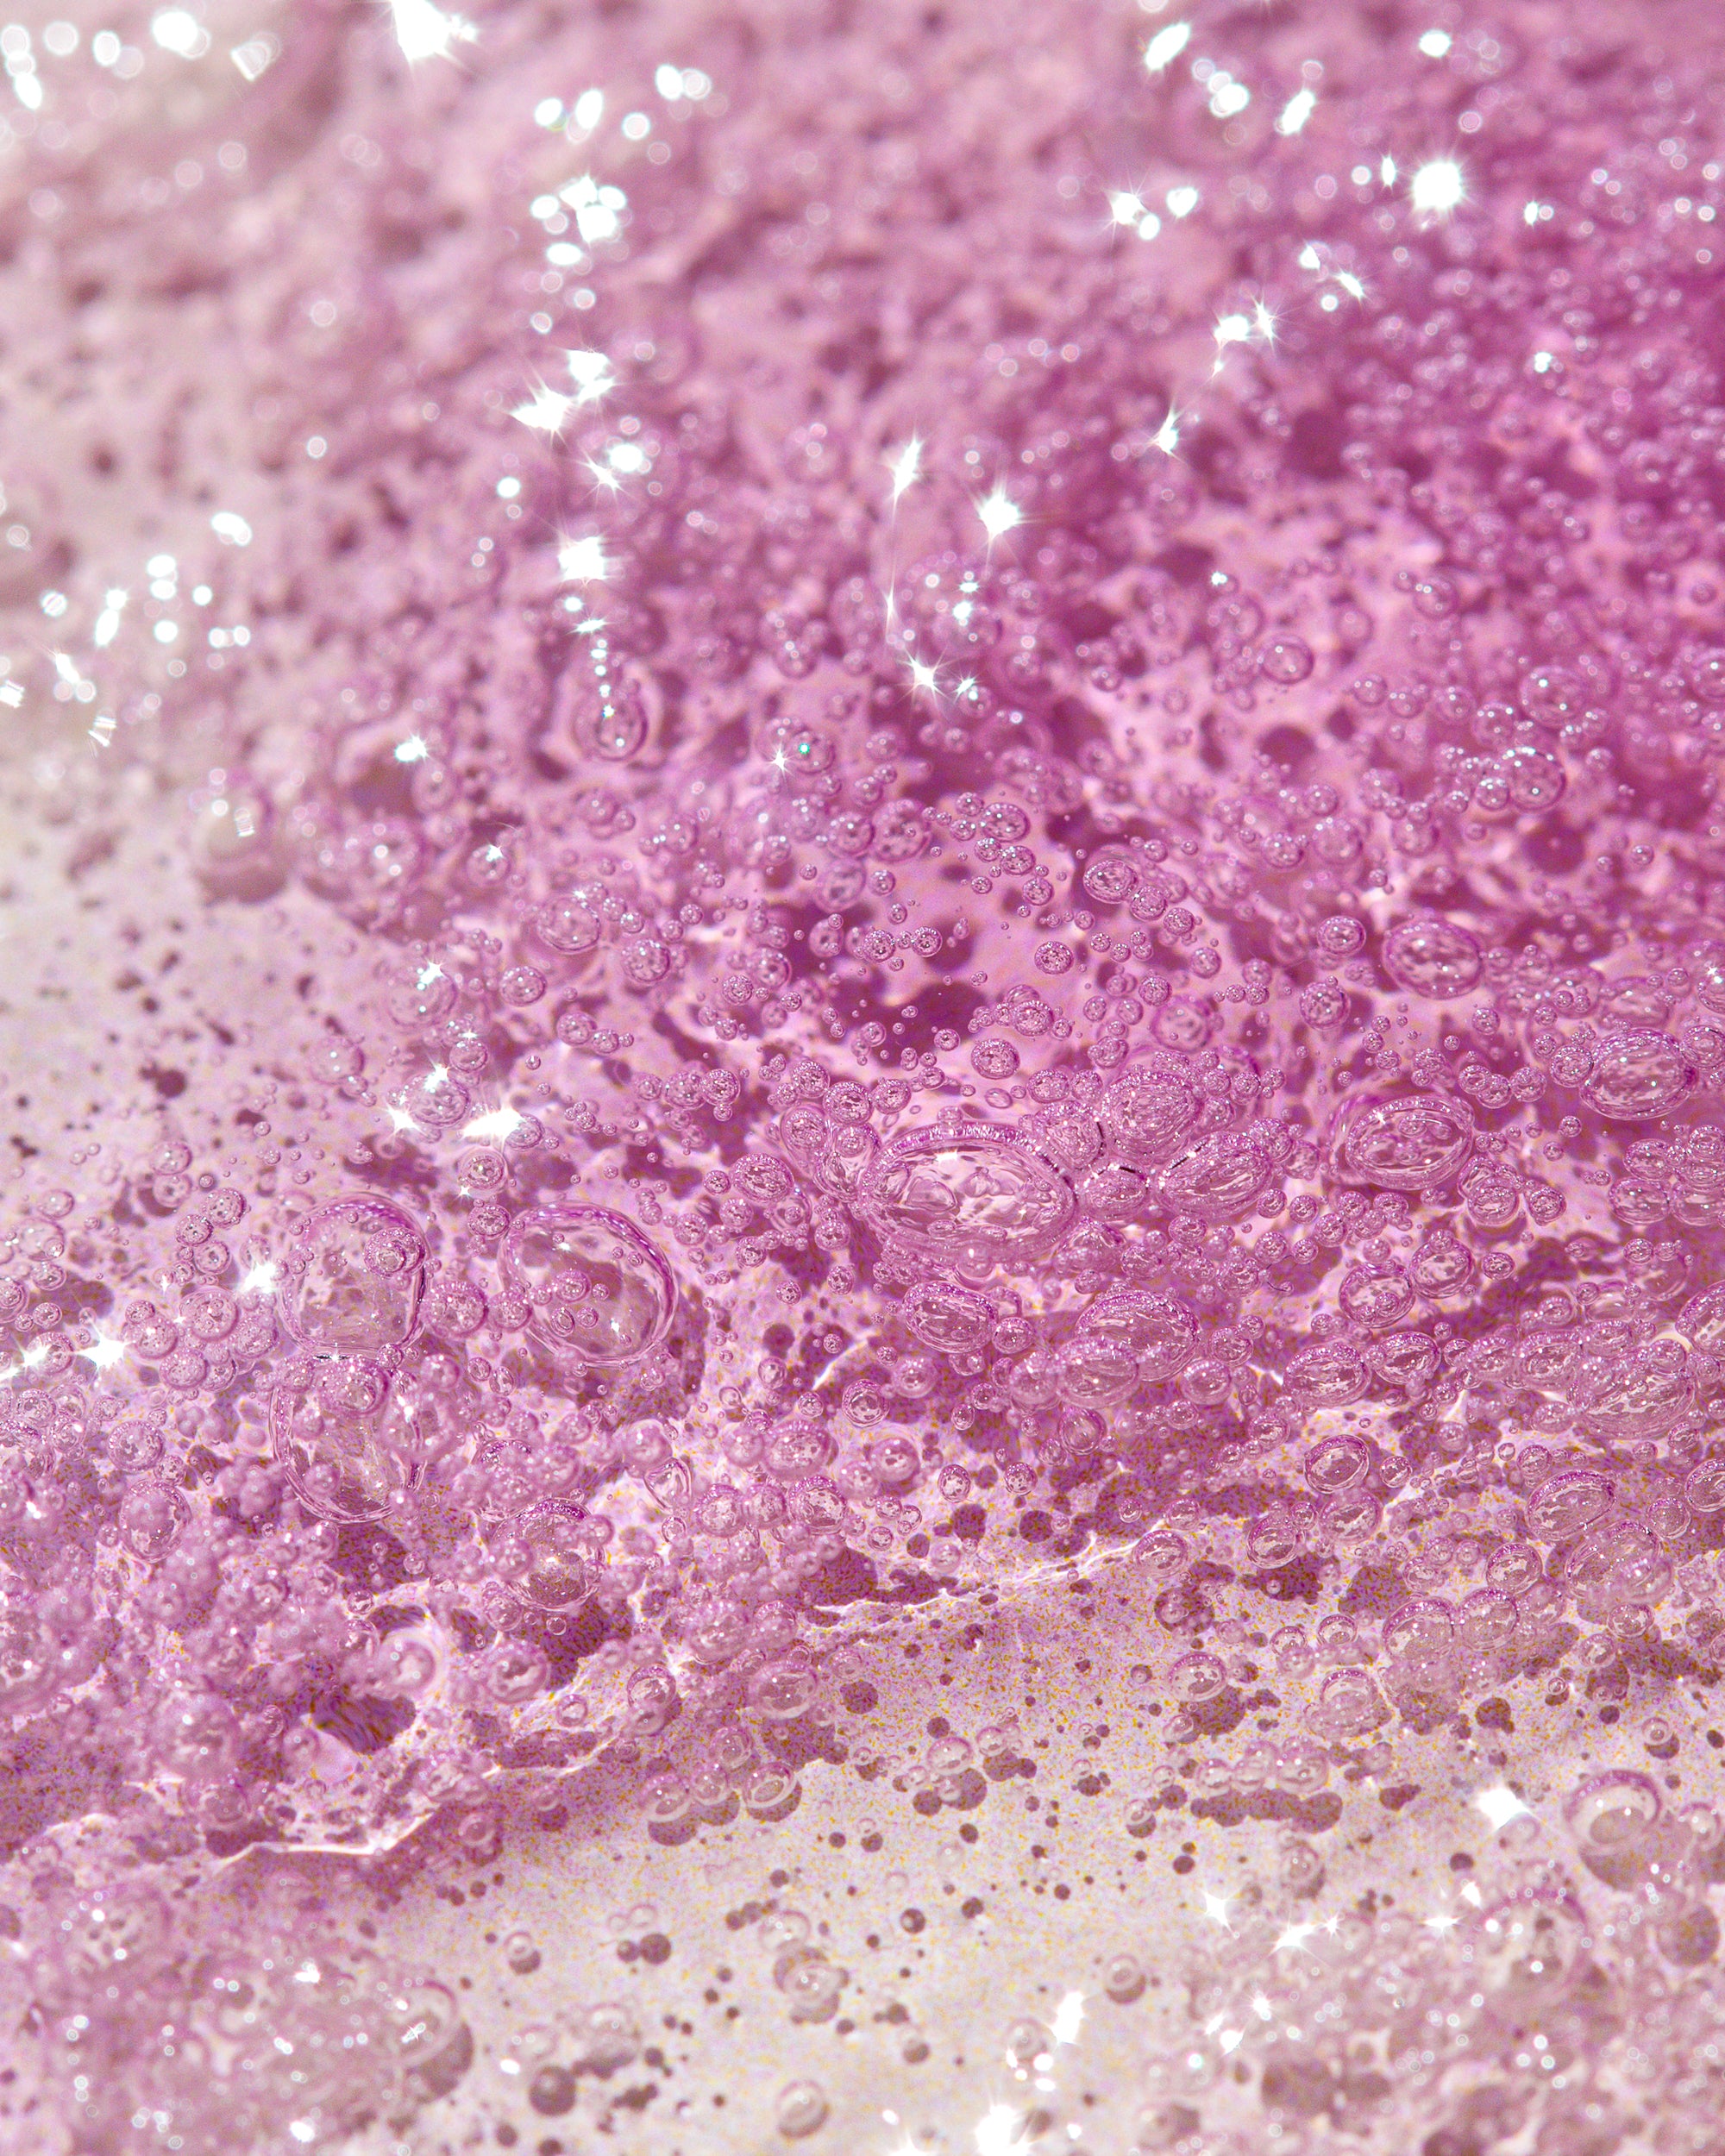 BODY [SESSI]ON. - Exfoliating Shower Gel - Unrefined Riches